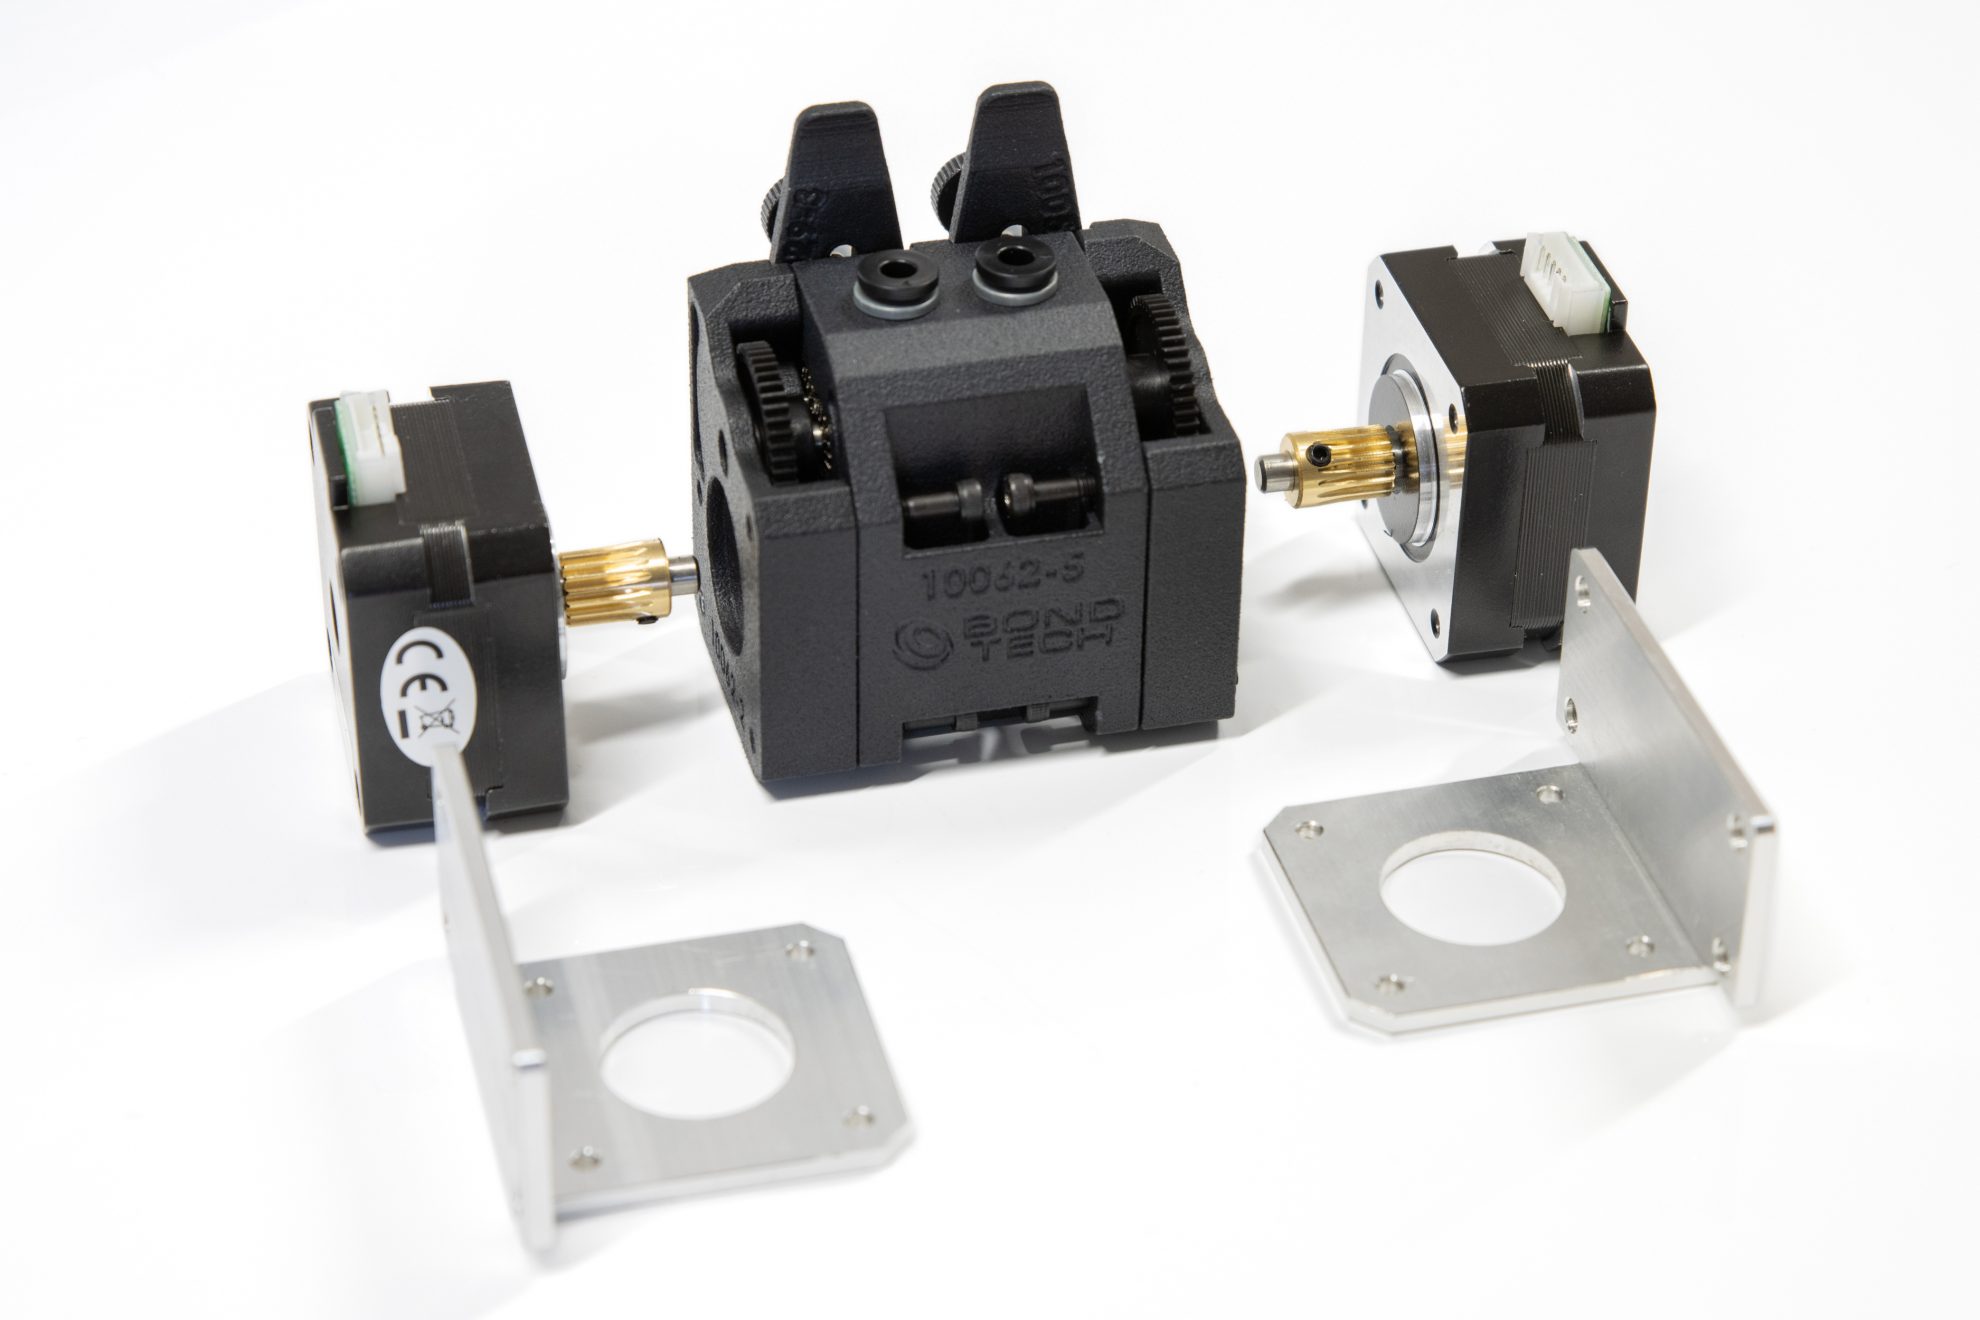 BMG-X2-M extruder and BMG ALU mount plates.